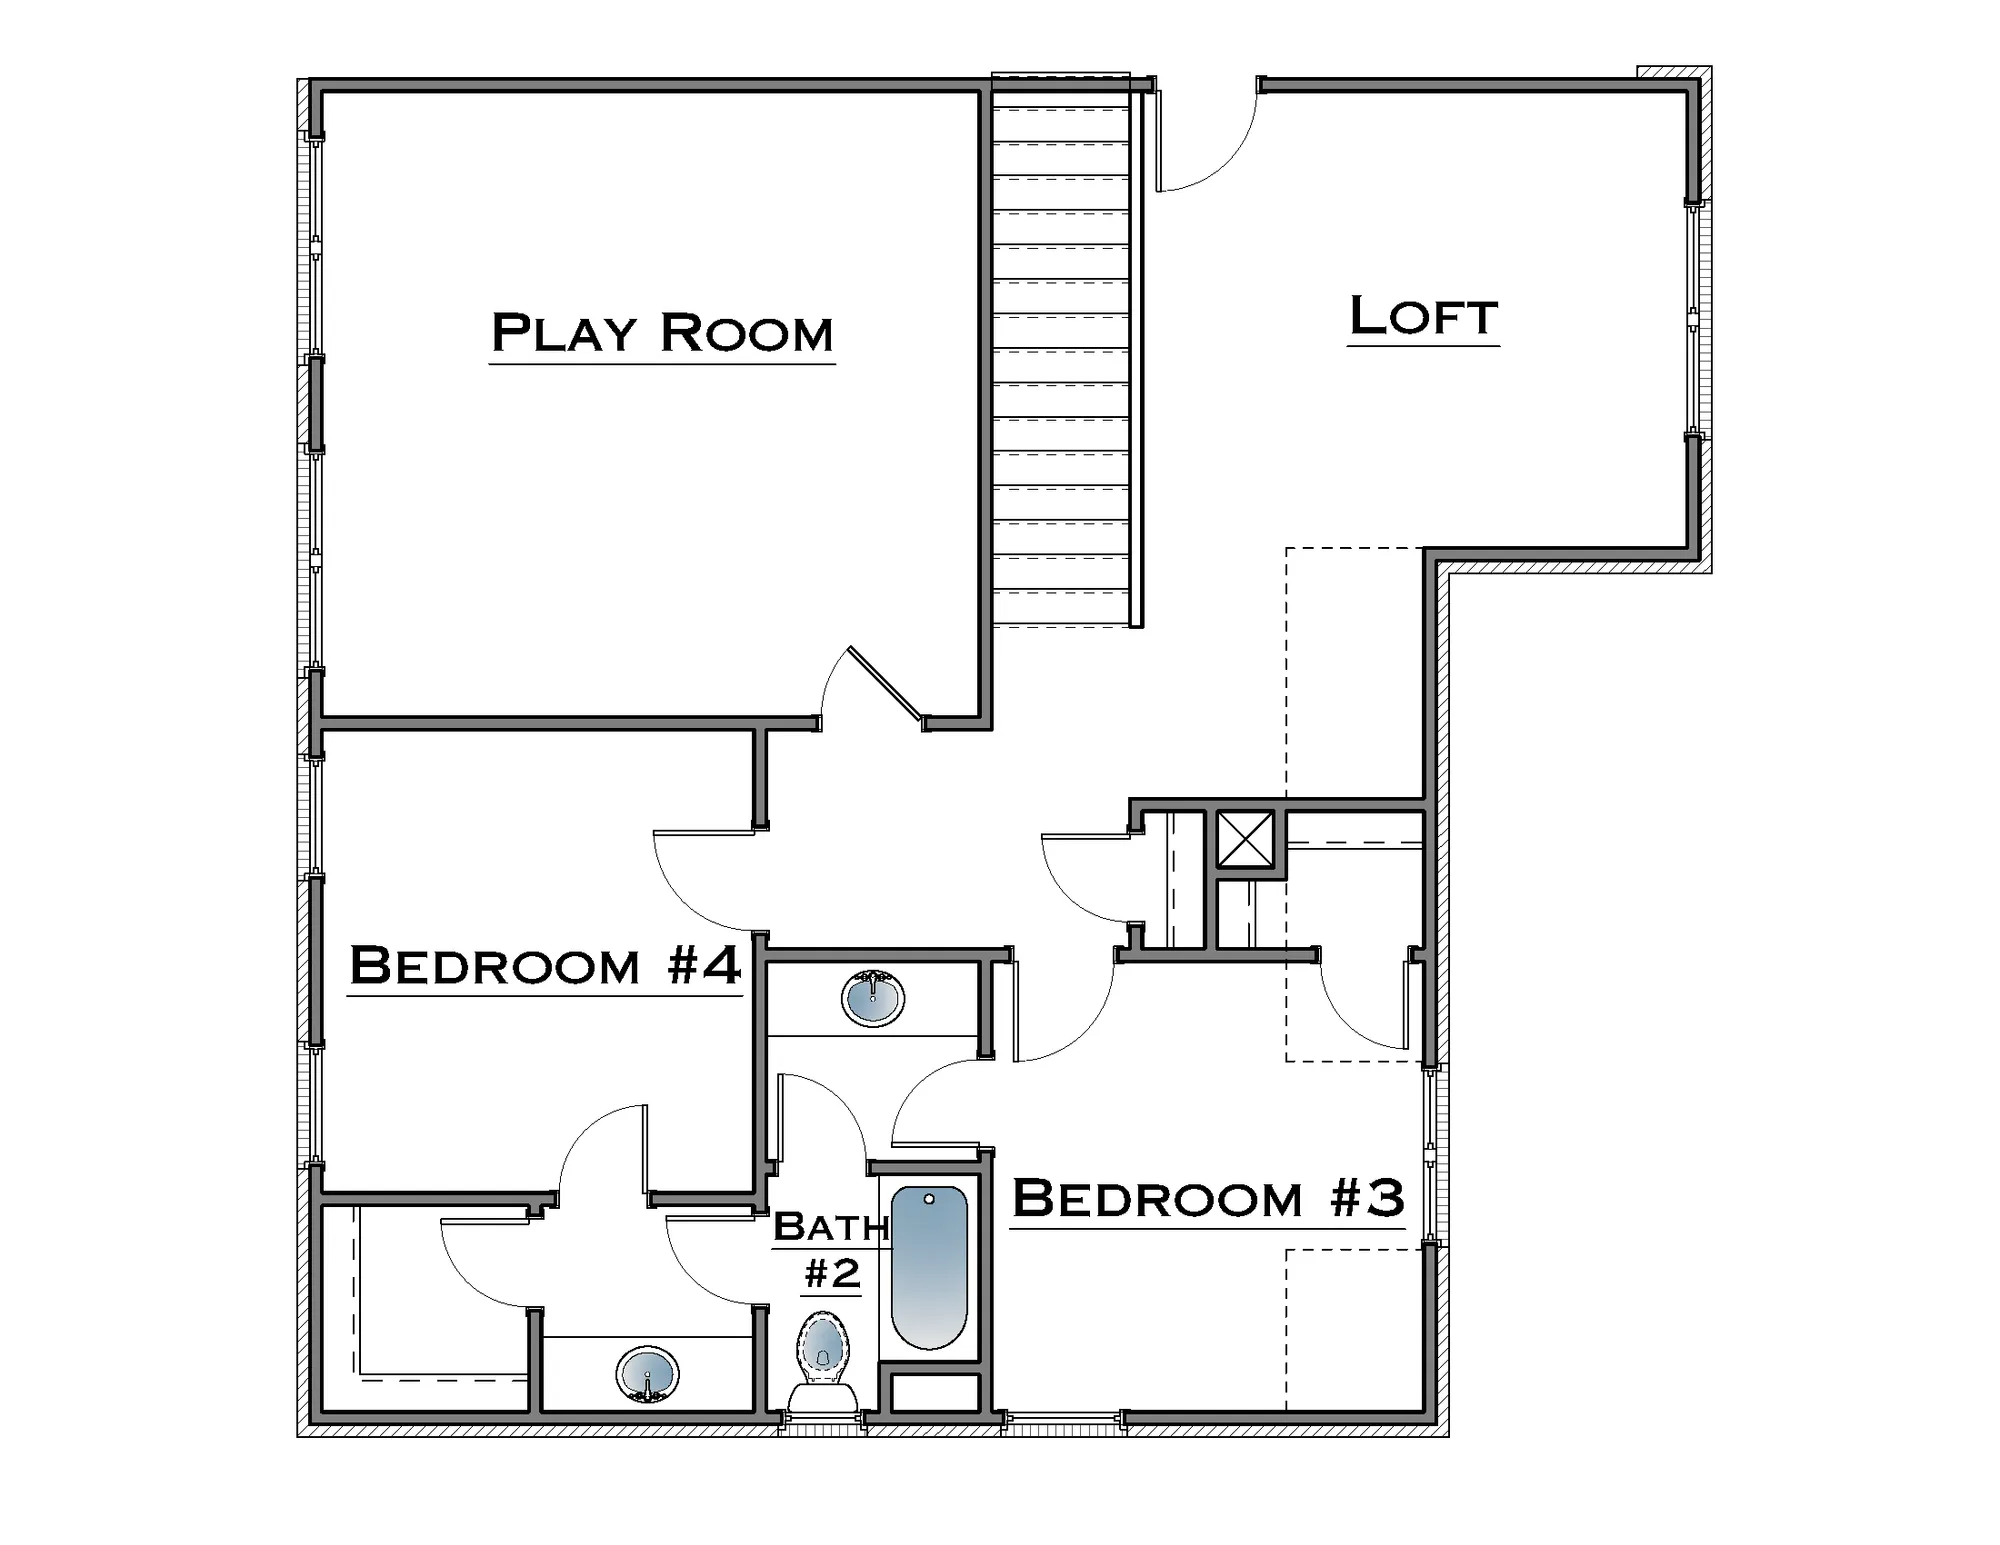 Upstairs Play Room Option - undefined